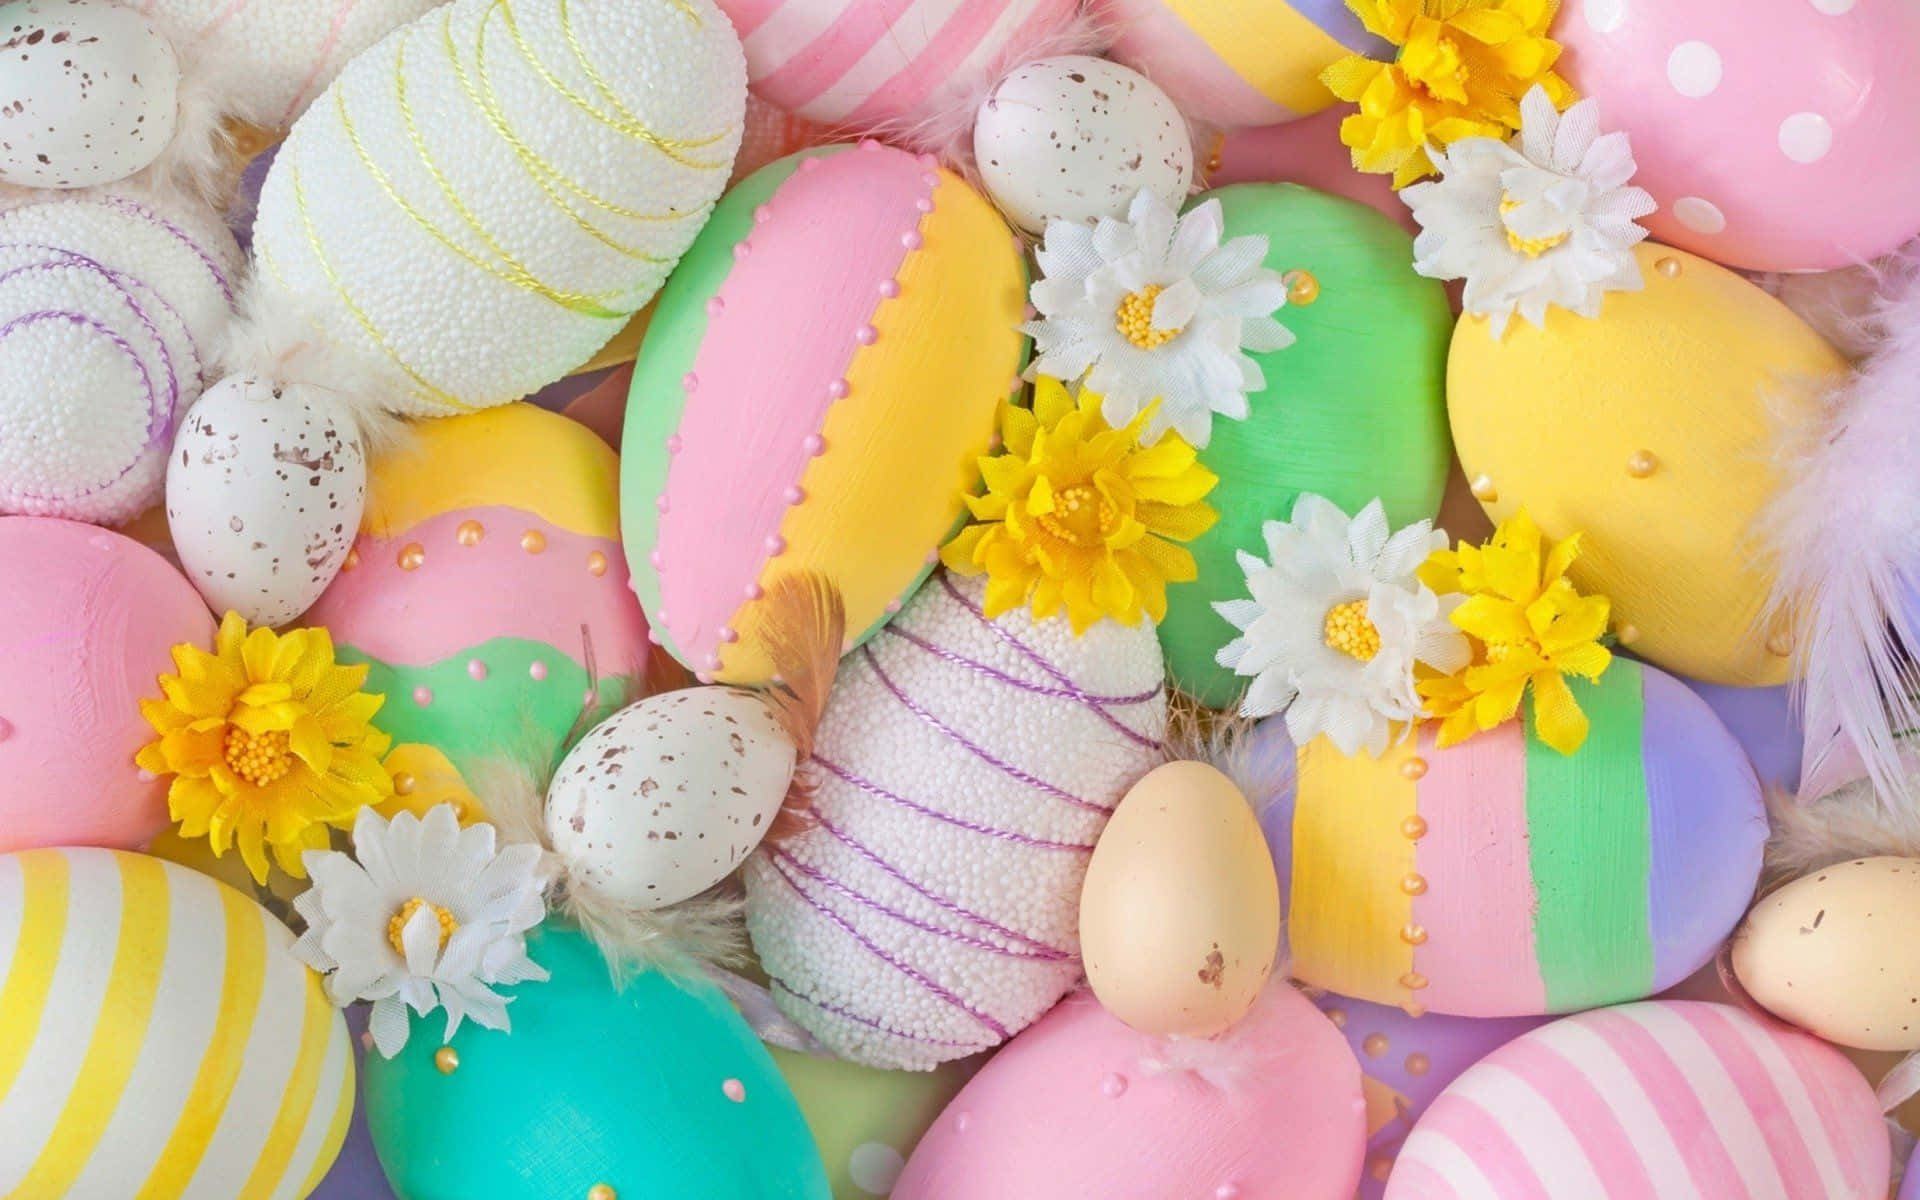 Delightful, Pastel Hues of the Perfect Easter